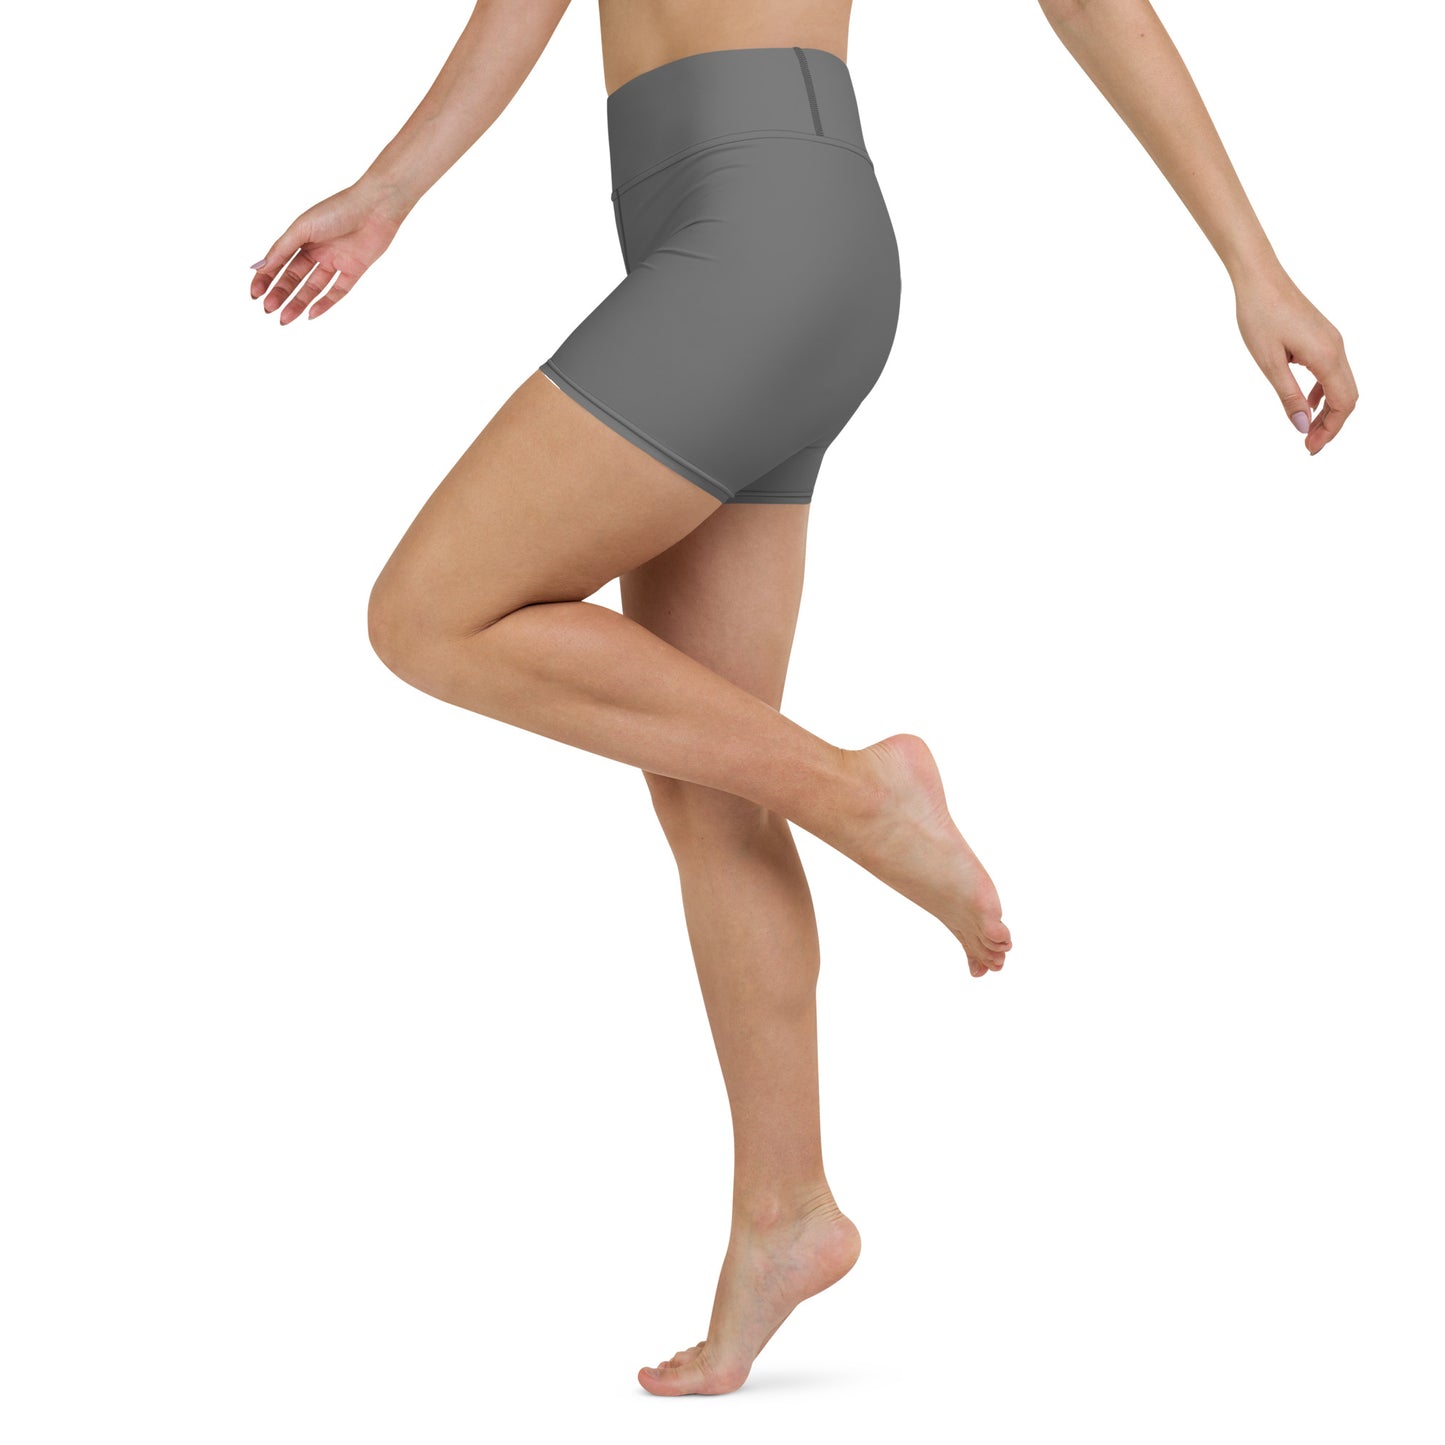 2Bdiscontinued. women's yoga shorts drkgry